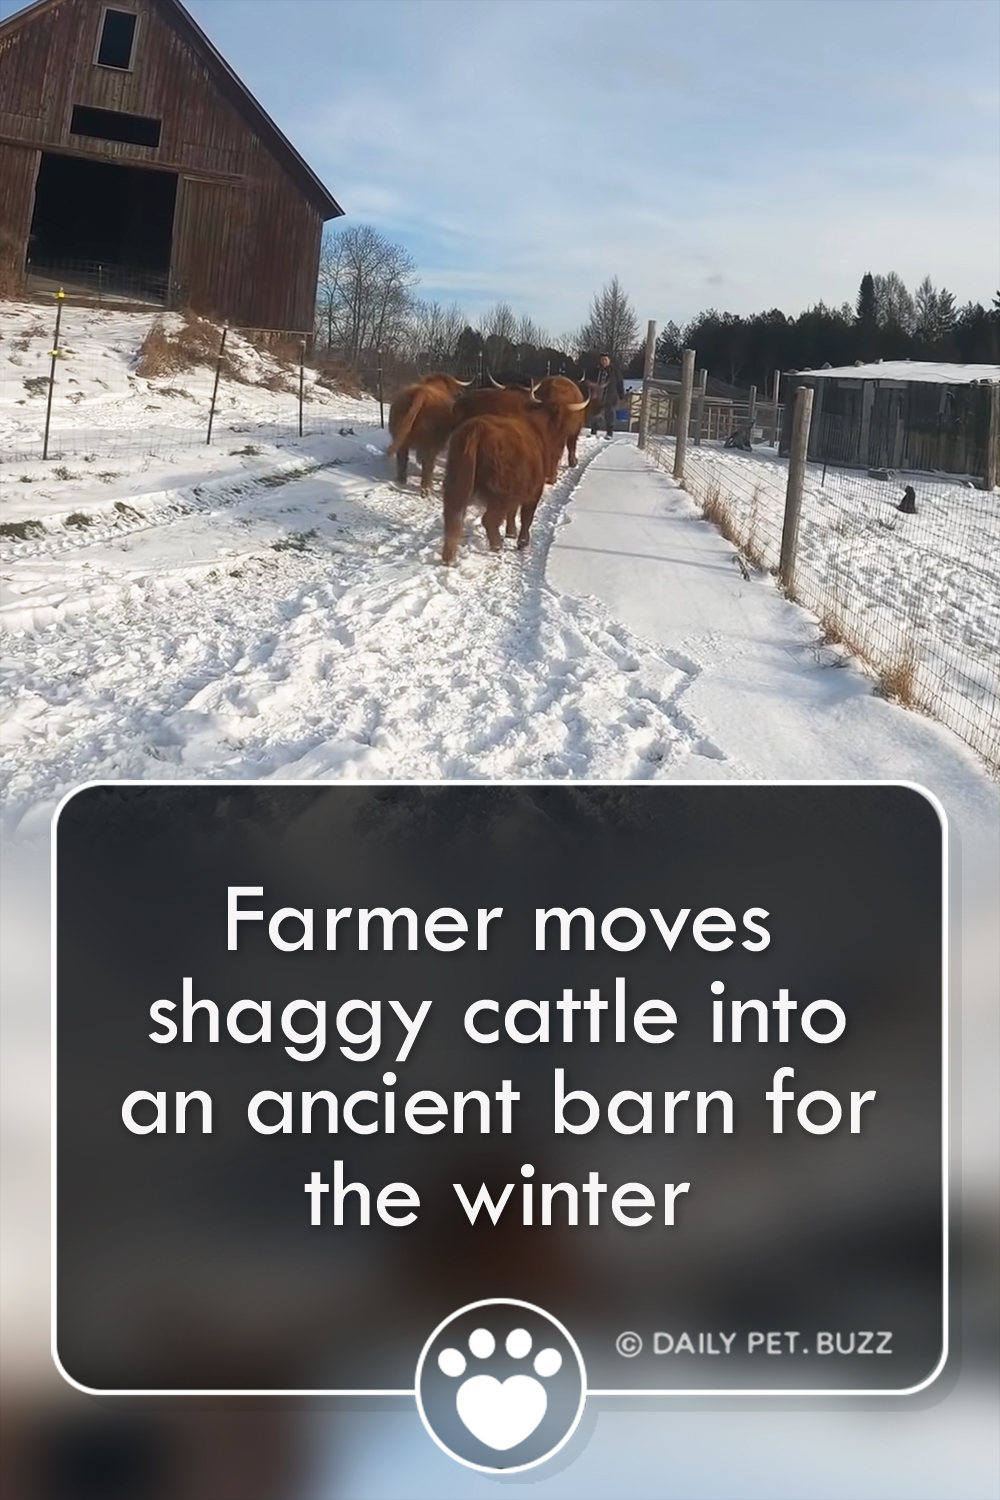 Farmer moves shaggy cattle into an ancient barn for the winter